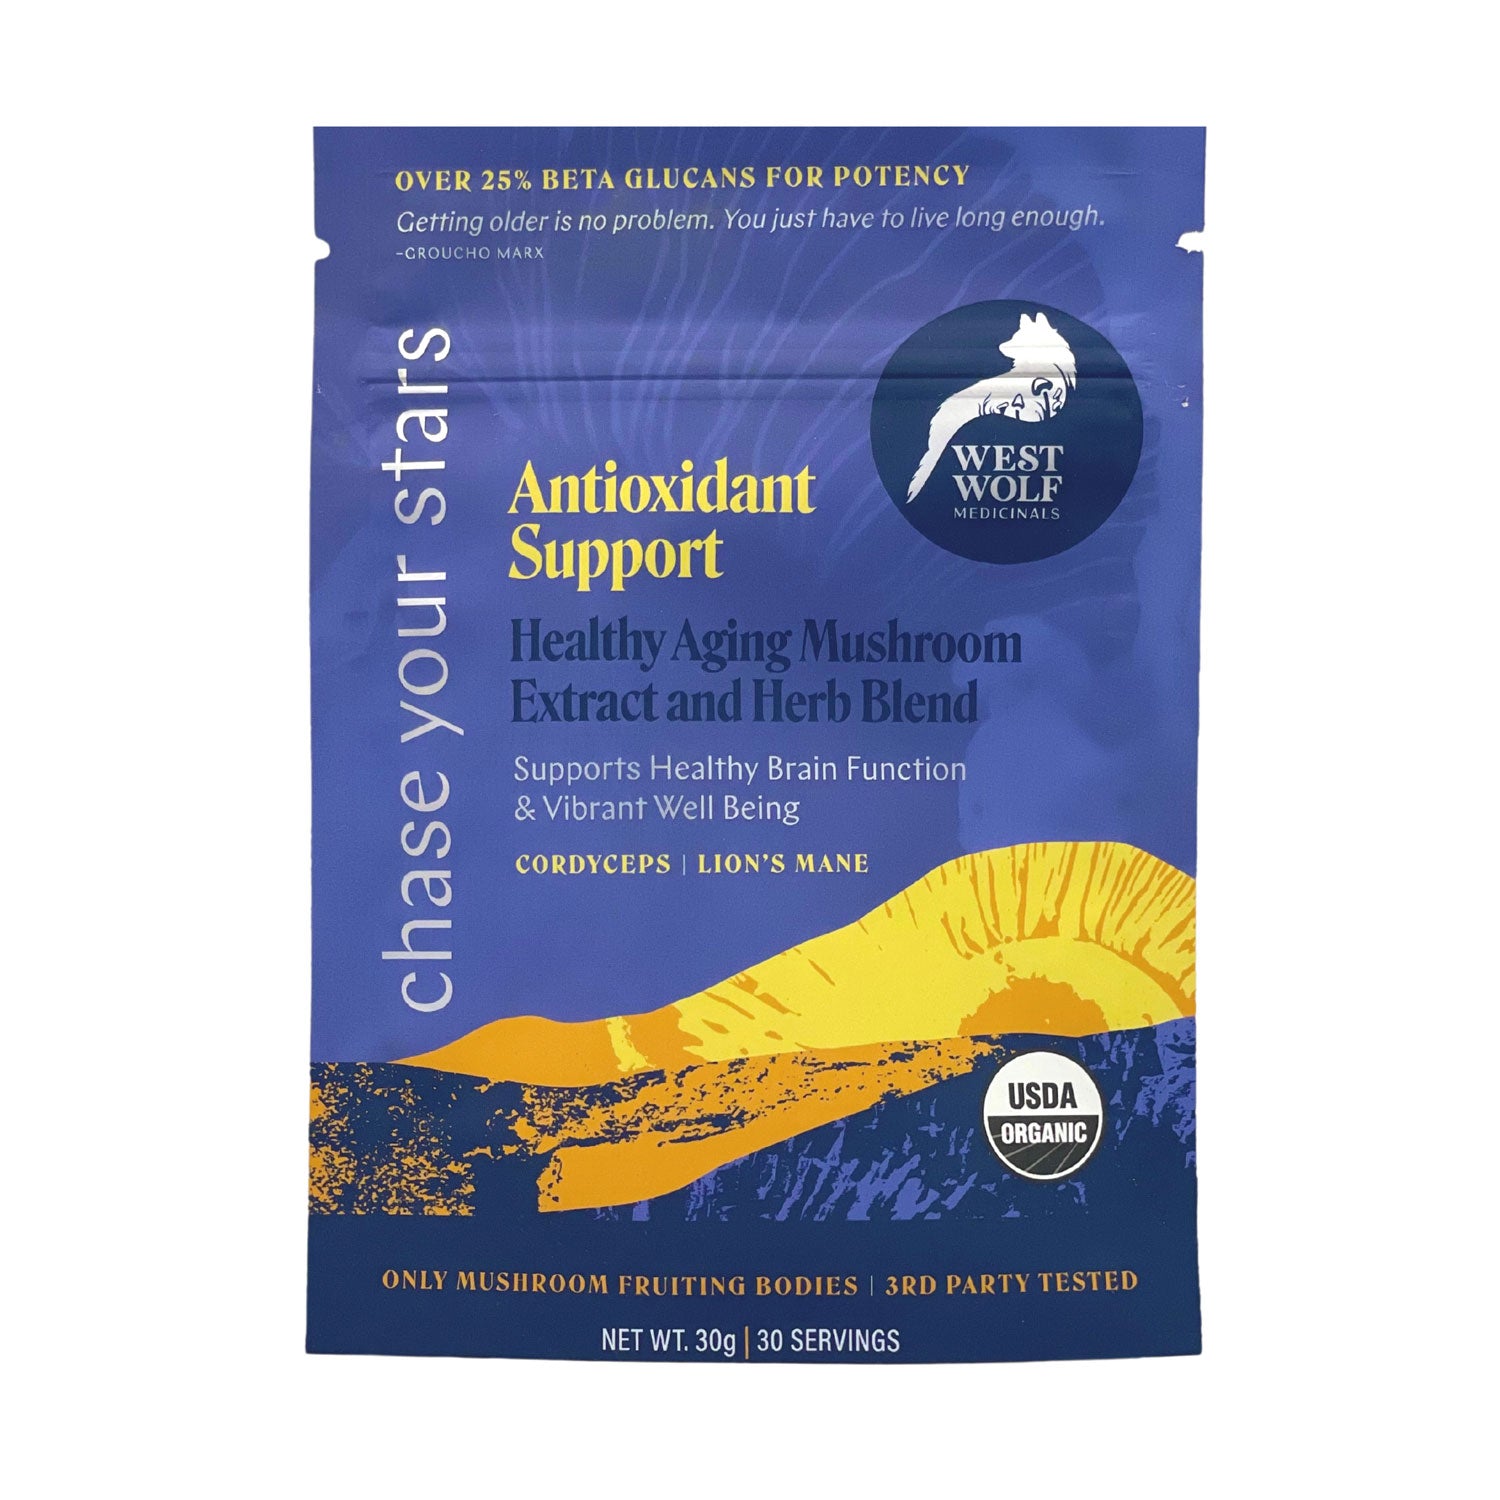 Antioxidant Support: Chase Your Stars